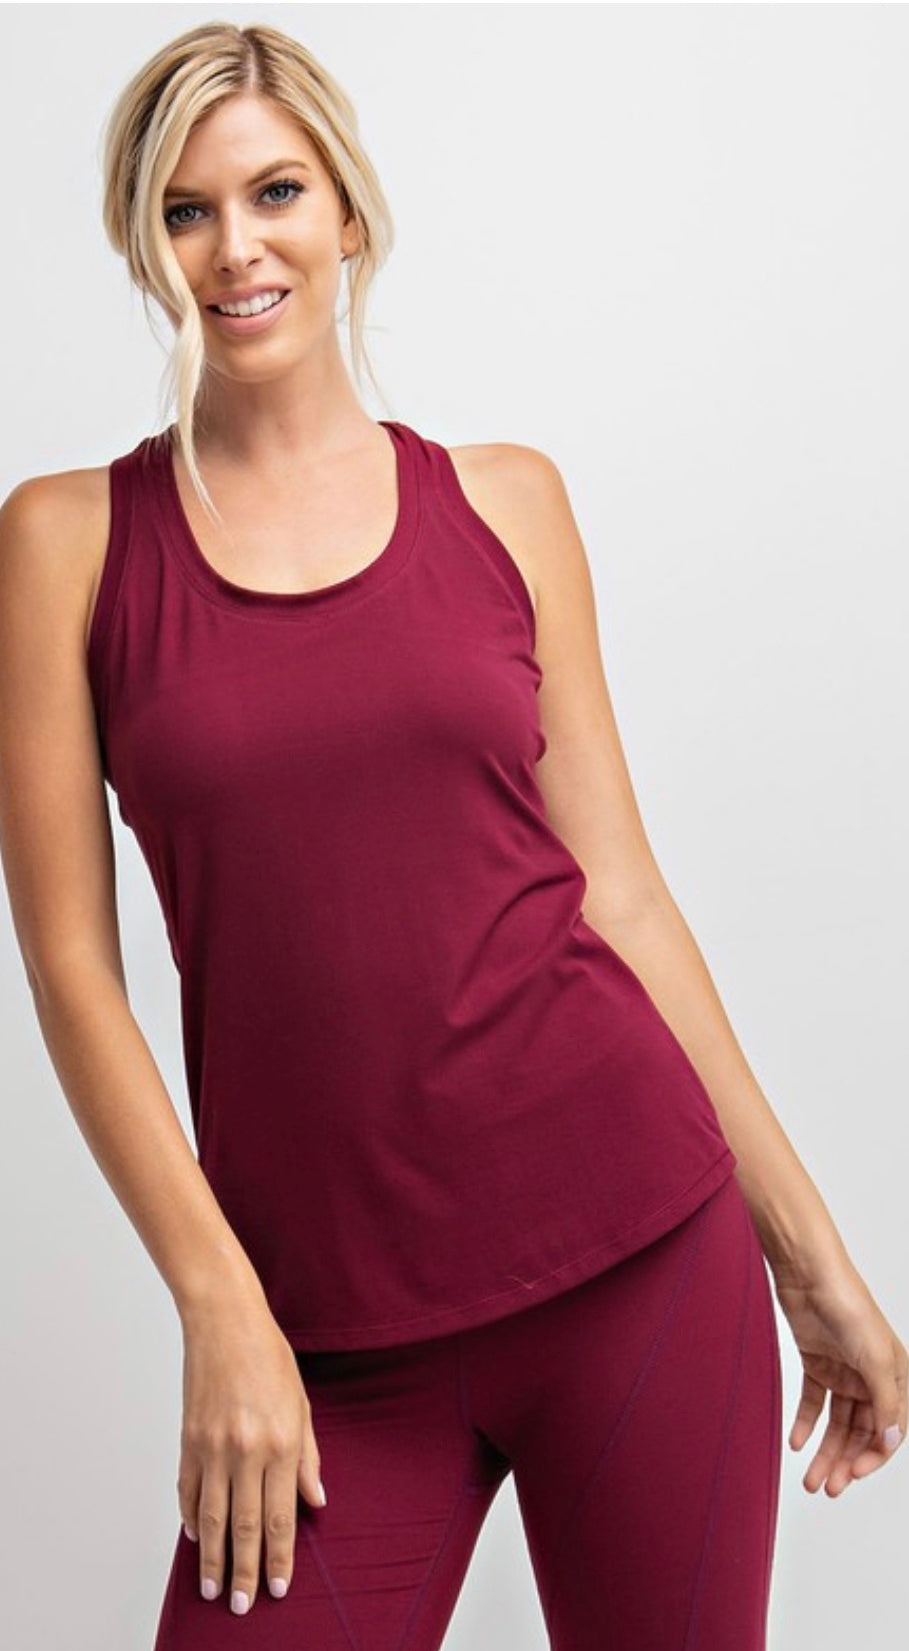 Let's Do This Burgundy Workout tank